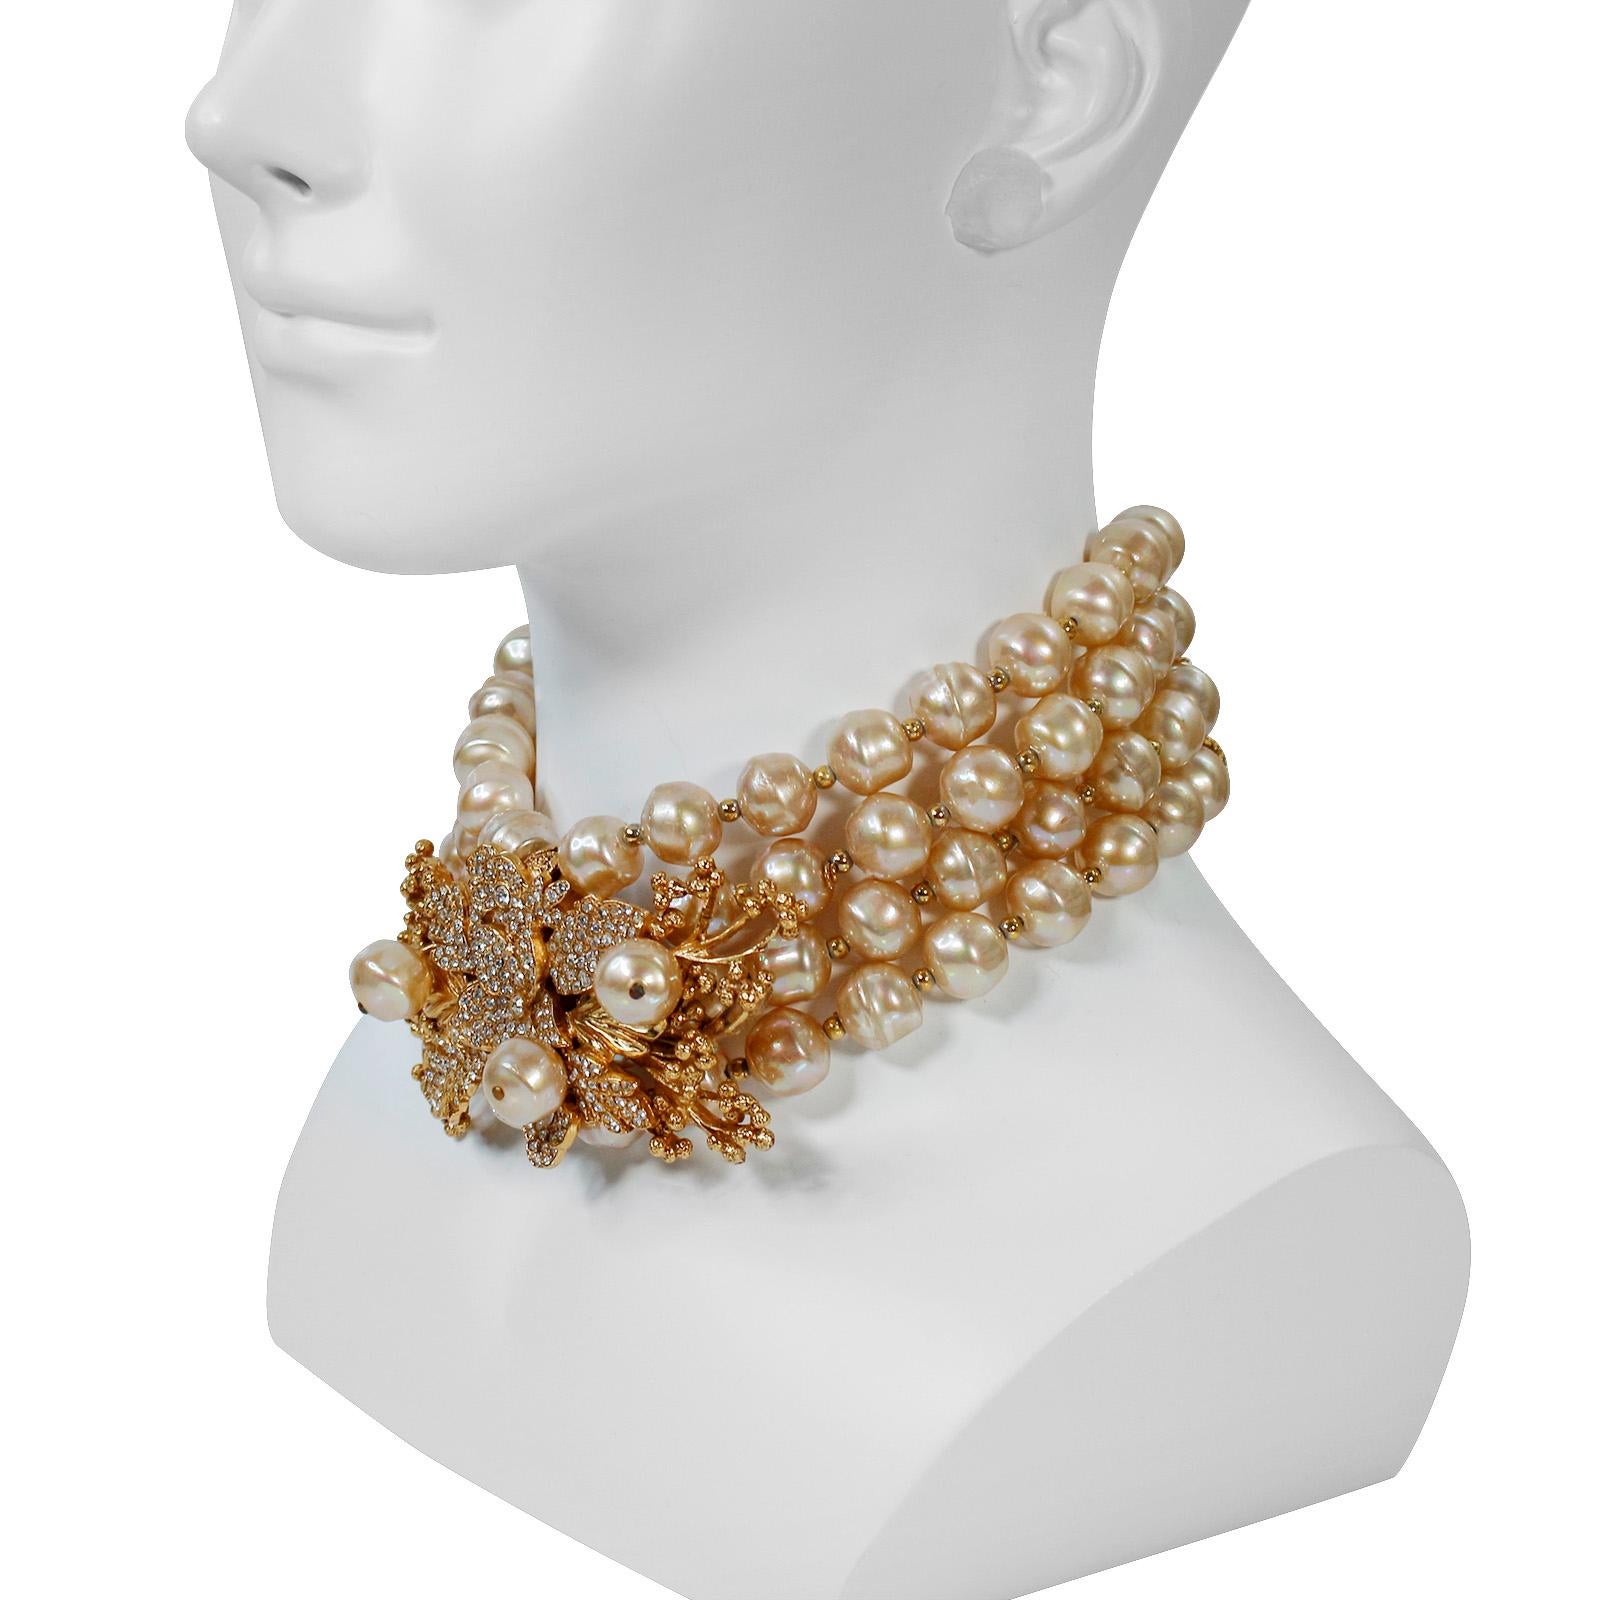 Artist Vintage Christian Dior  Couture Gold Tone and Pearl Necklace Circa 1980s For Sale